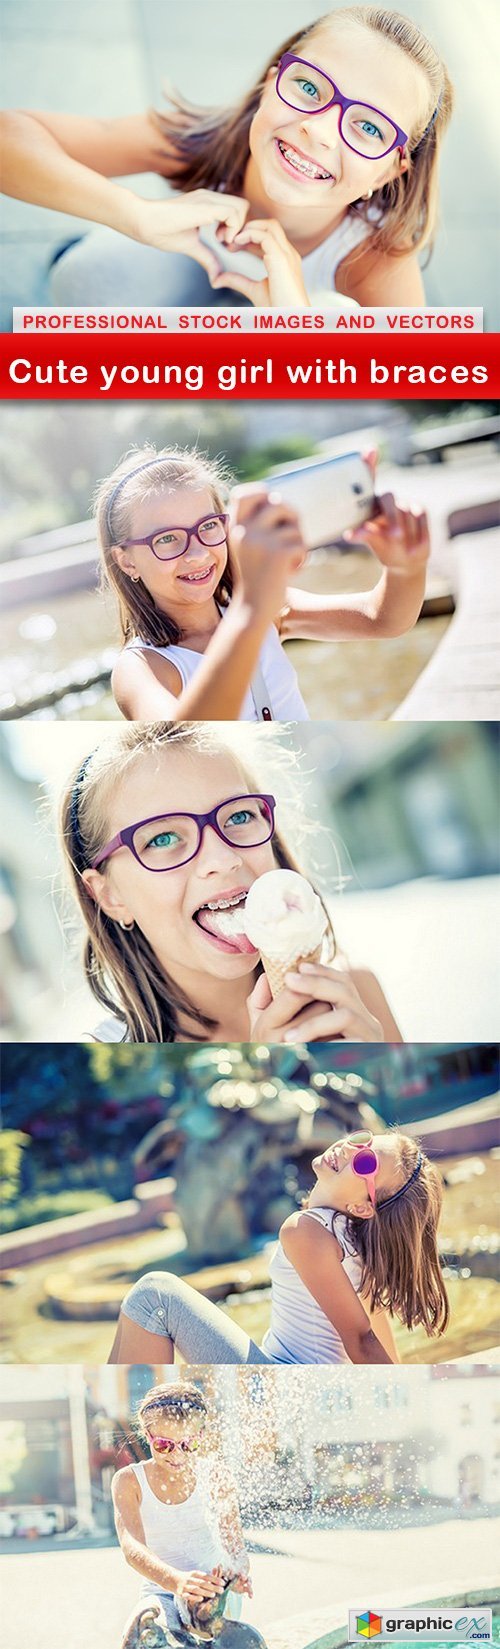 Cute young girl with braces - 5 UHQ JPEG